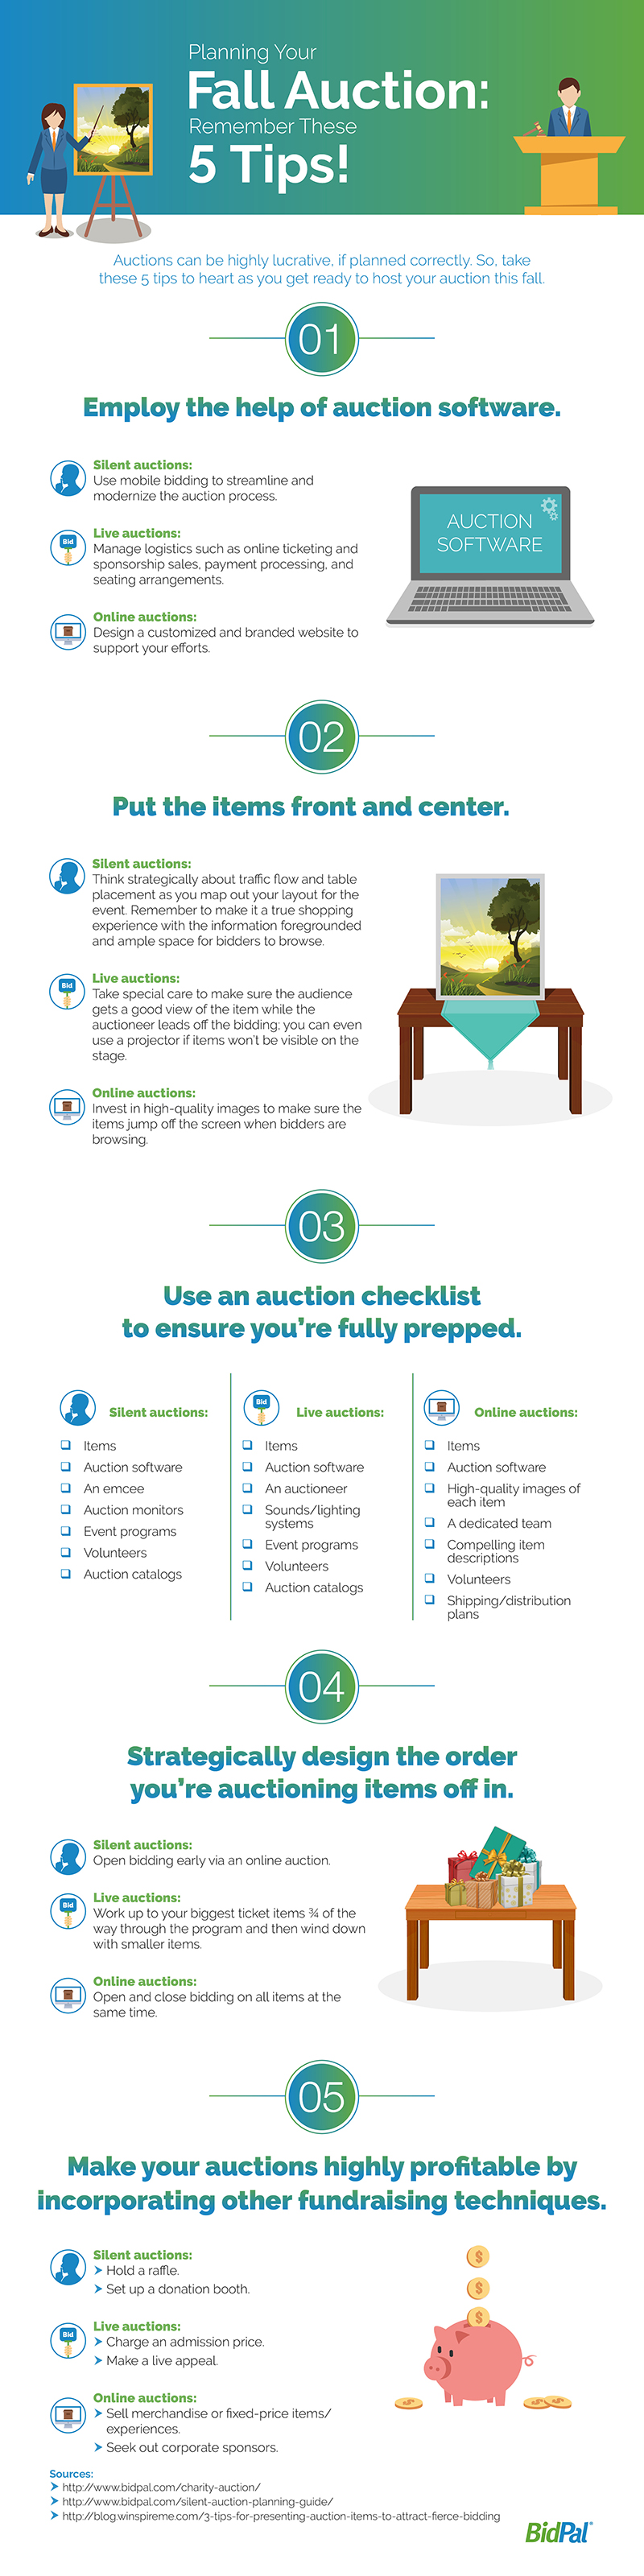 Fall Auction Tips - BidPal Infographic